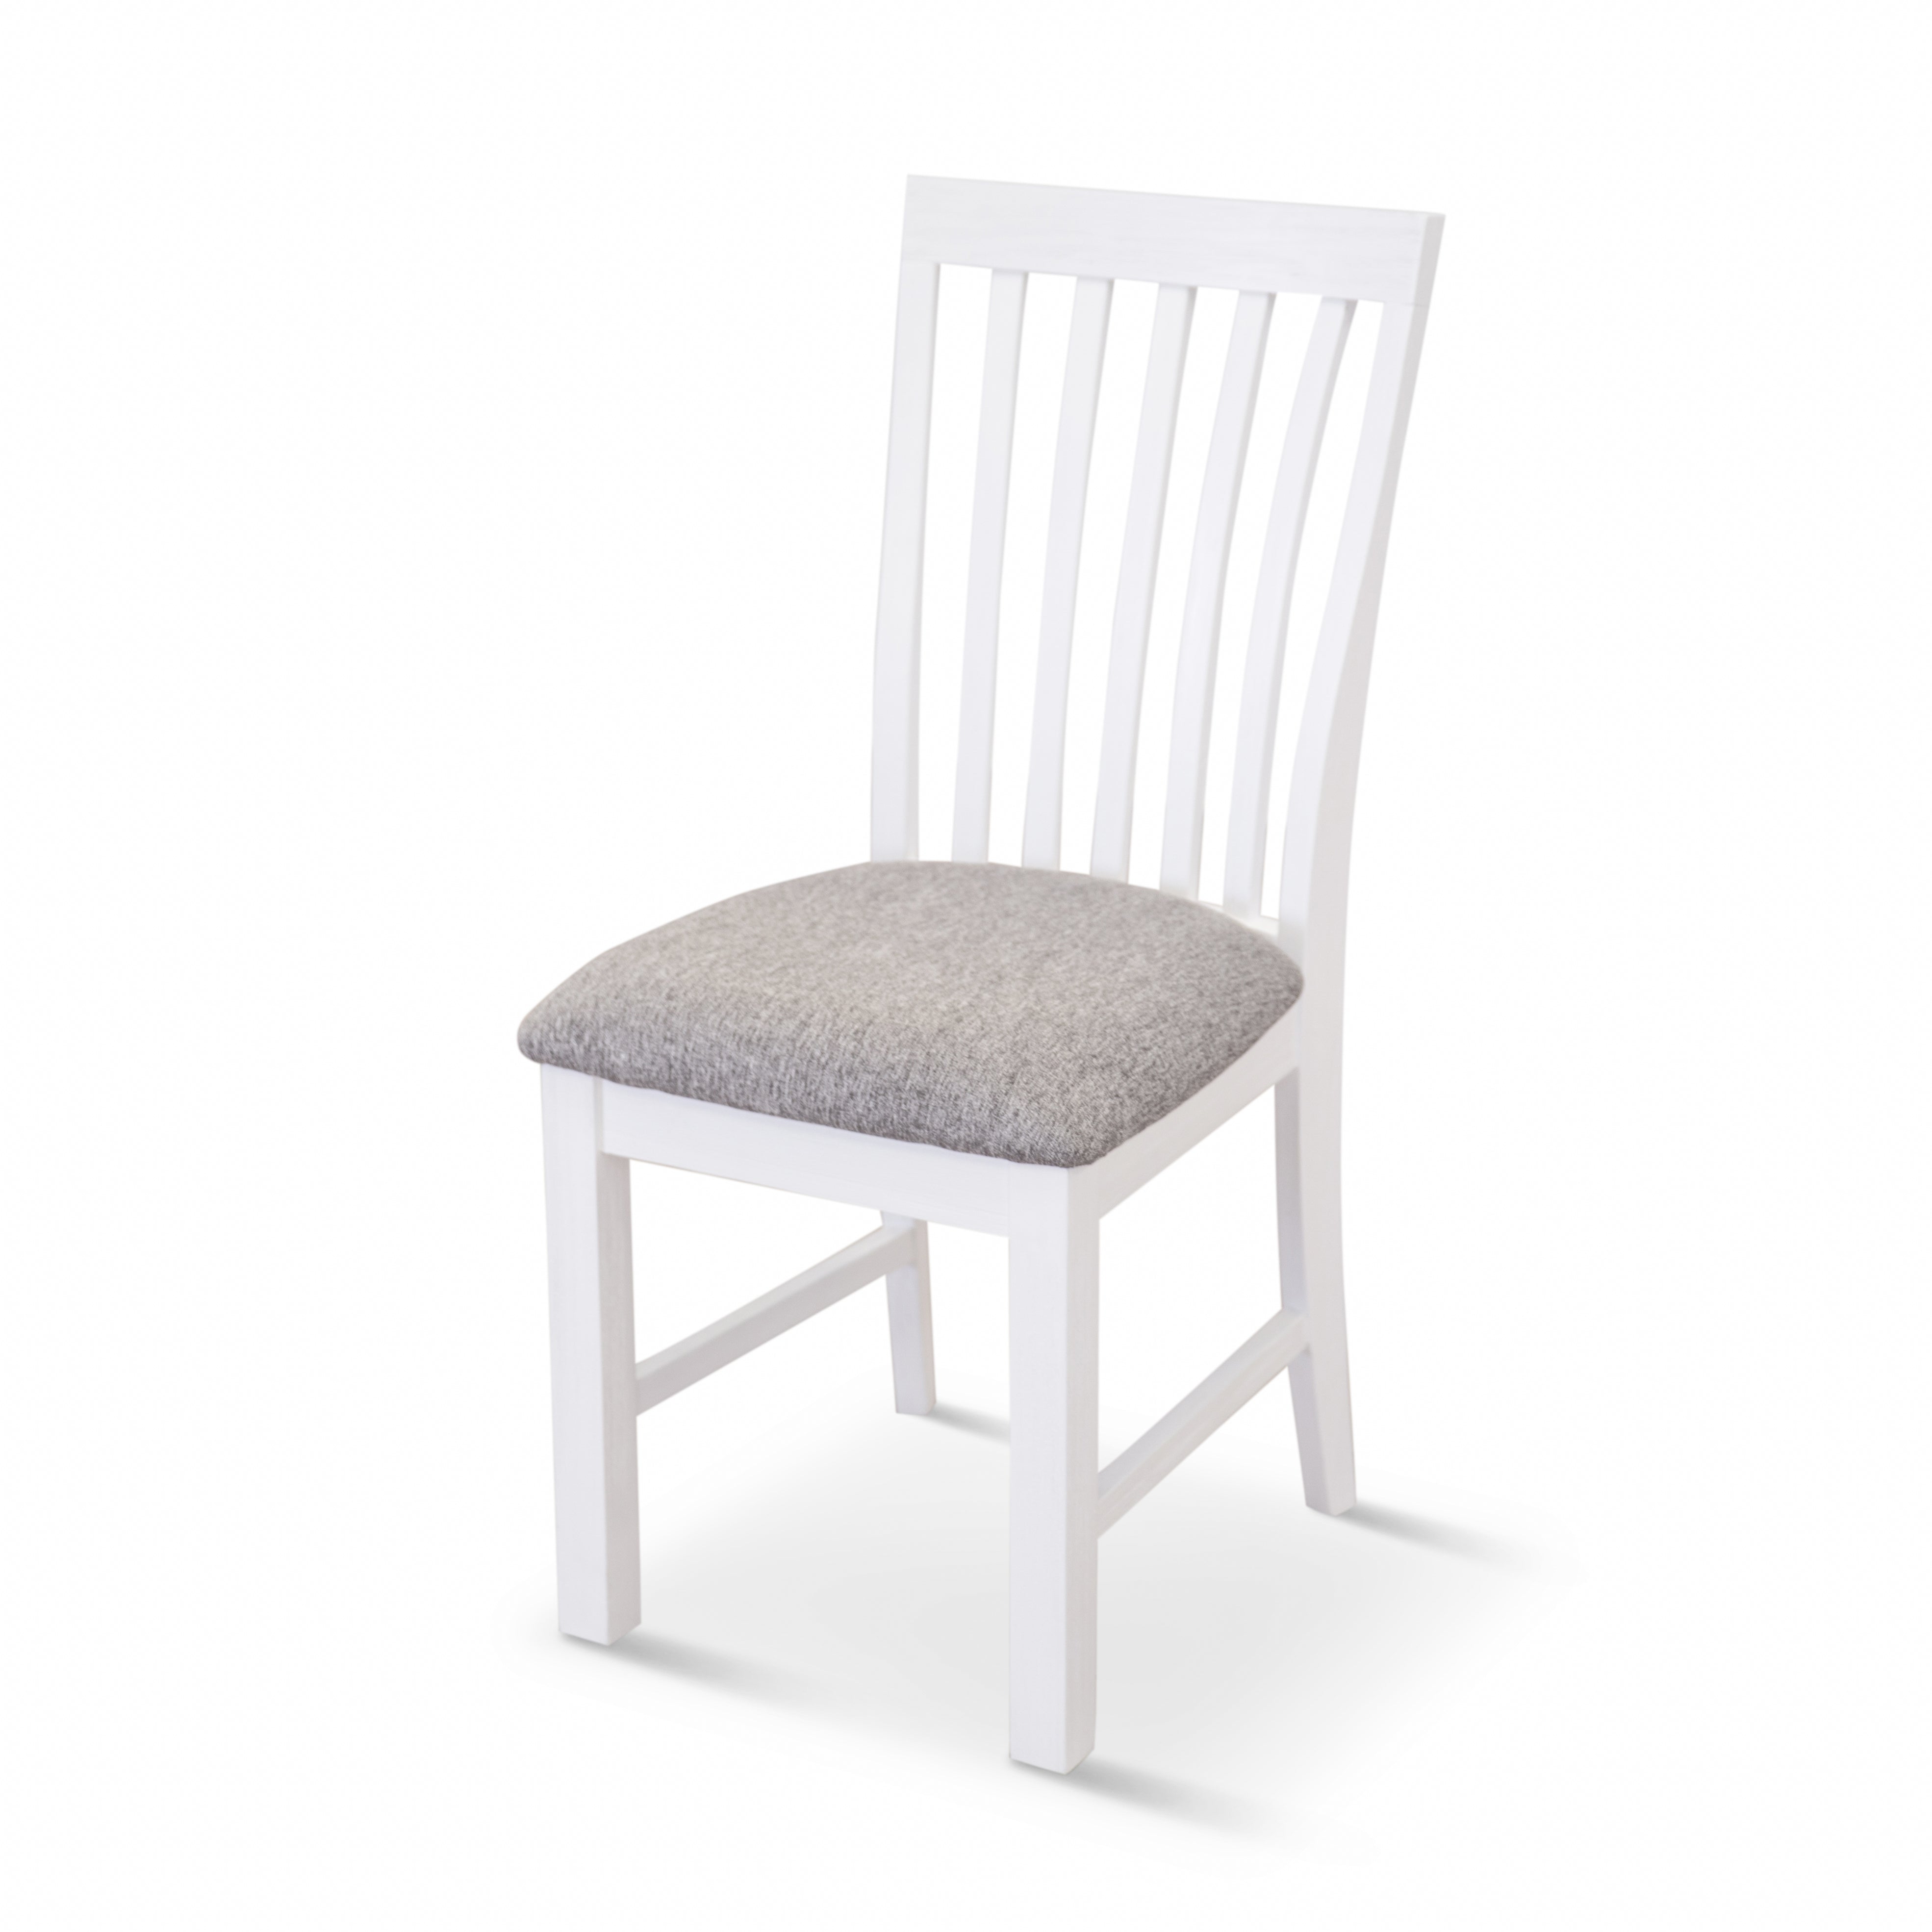 Dining Chair Set Of 6 Solid Acacia Timber Wood Coastal Furniture - White